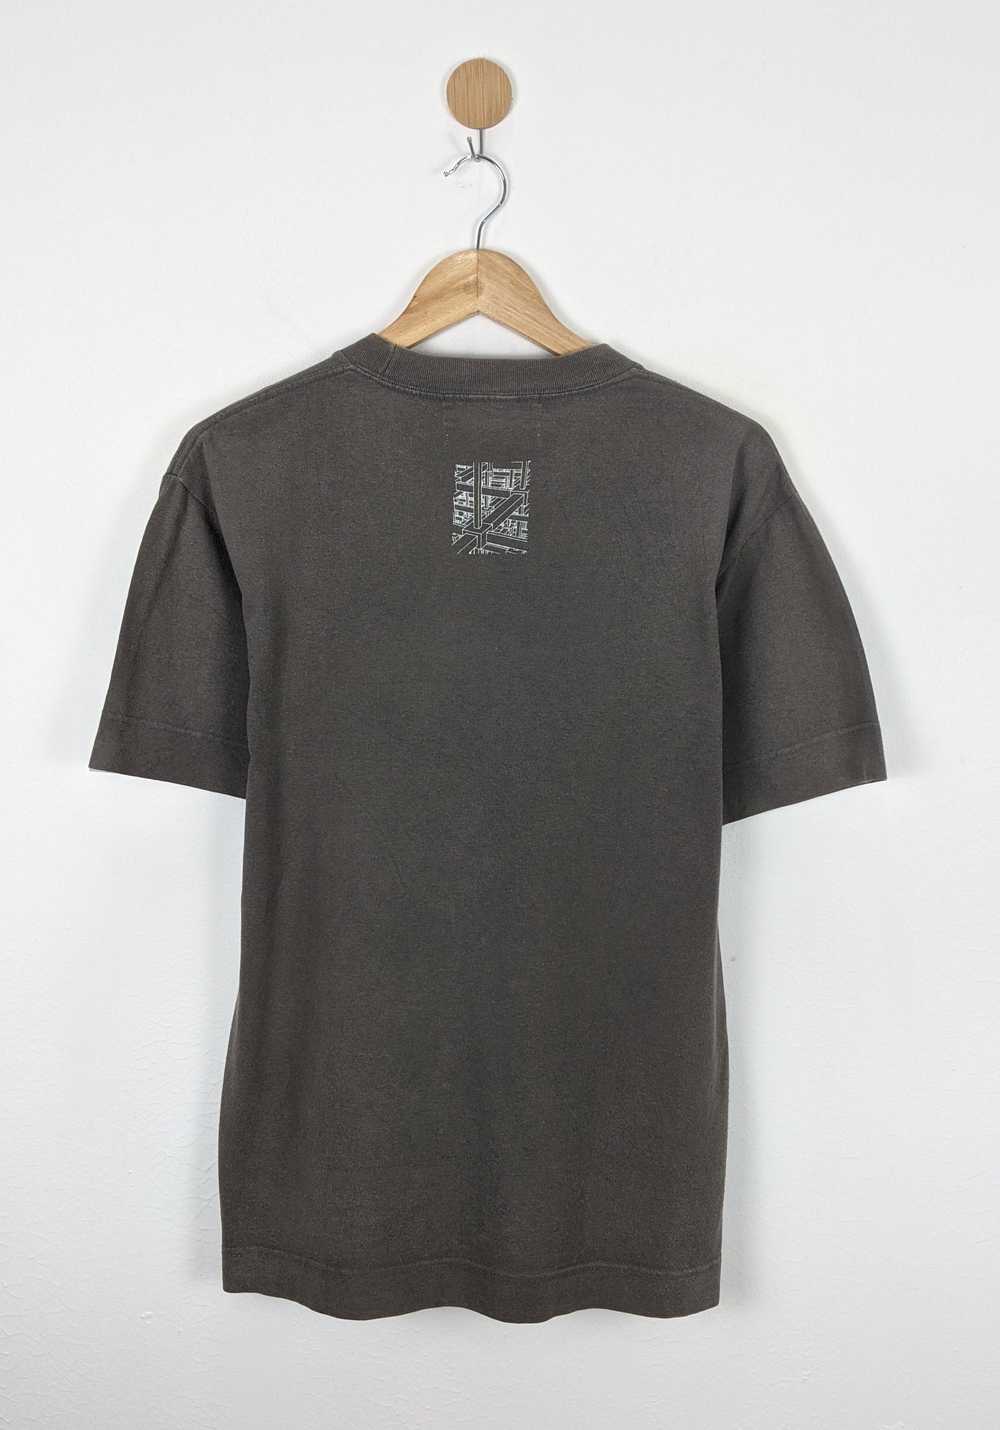 General Research 2001 shirt - image 3